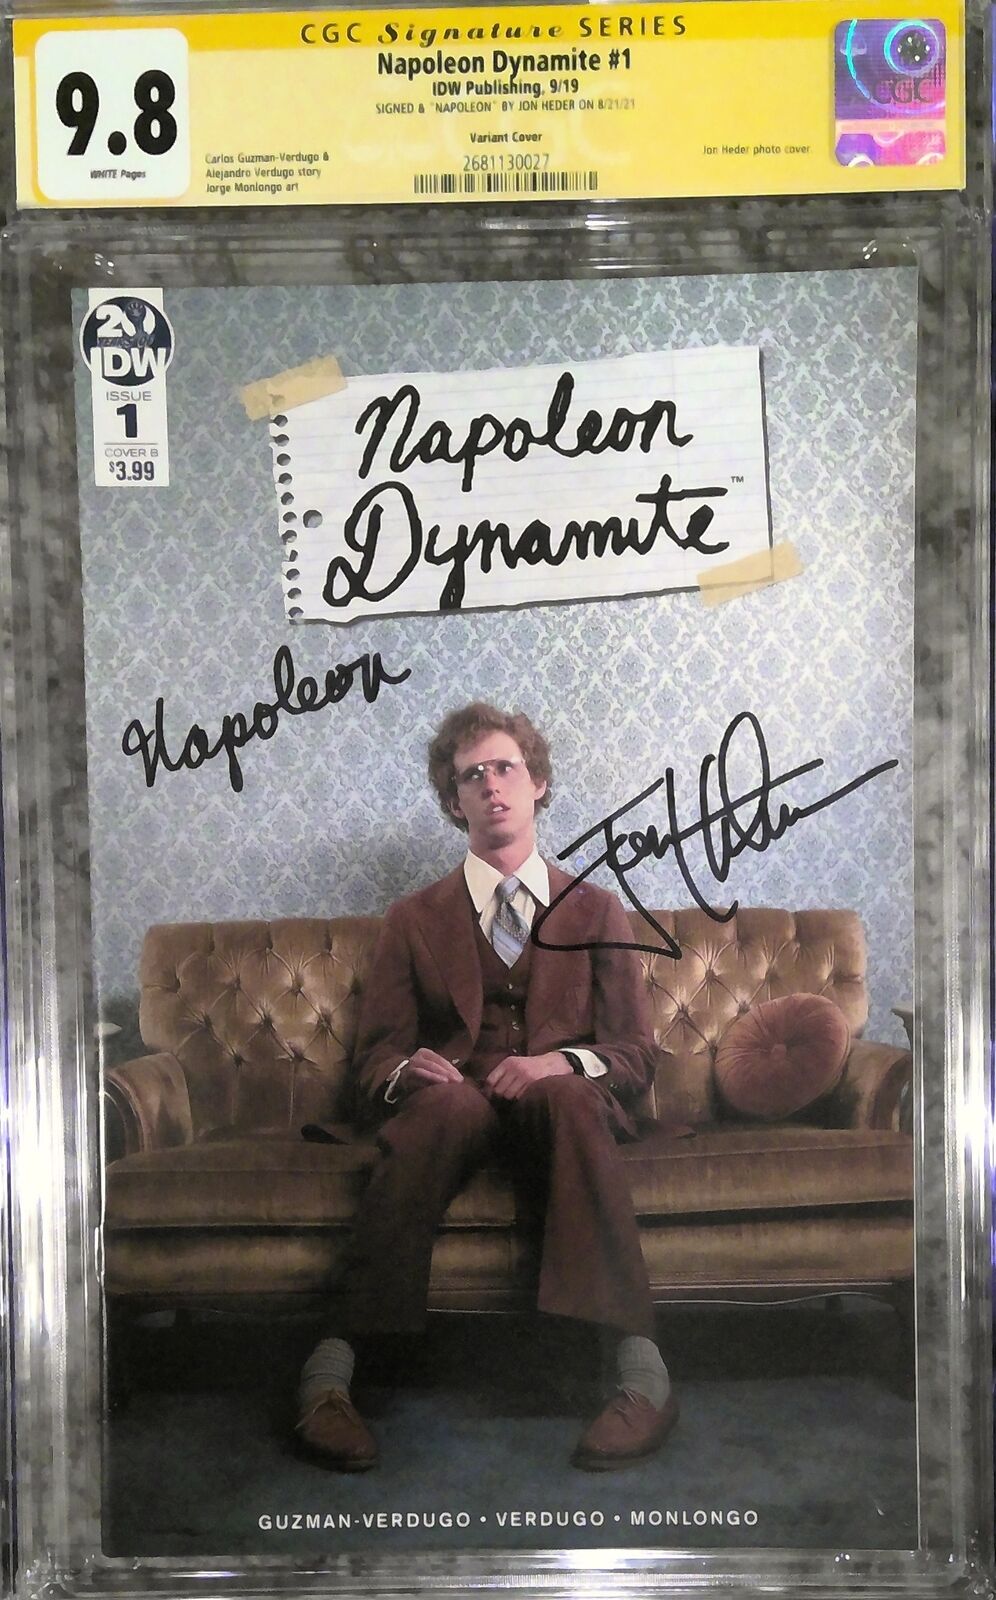 Napoleon Dynamite #1 photo cover__CGC 9.8 SS__Signed by Jon Heder